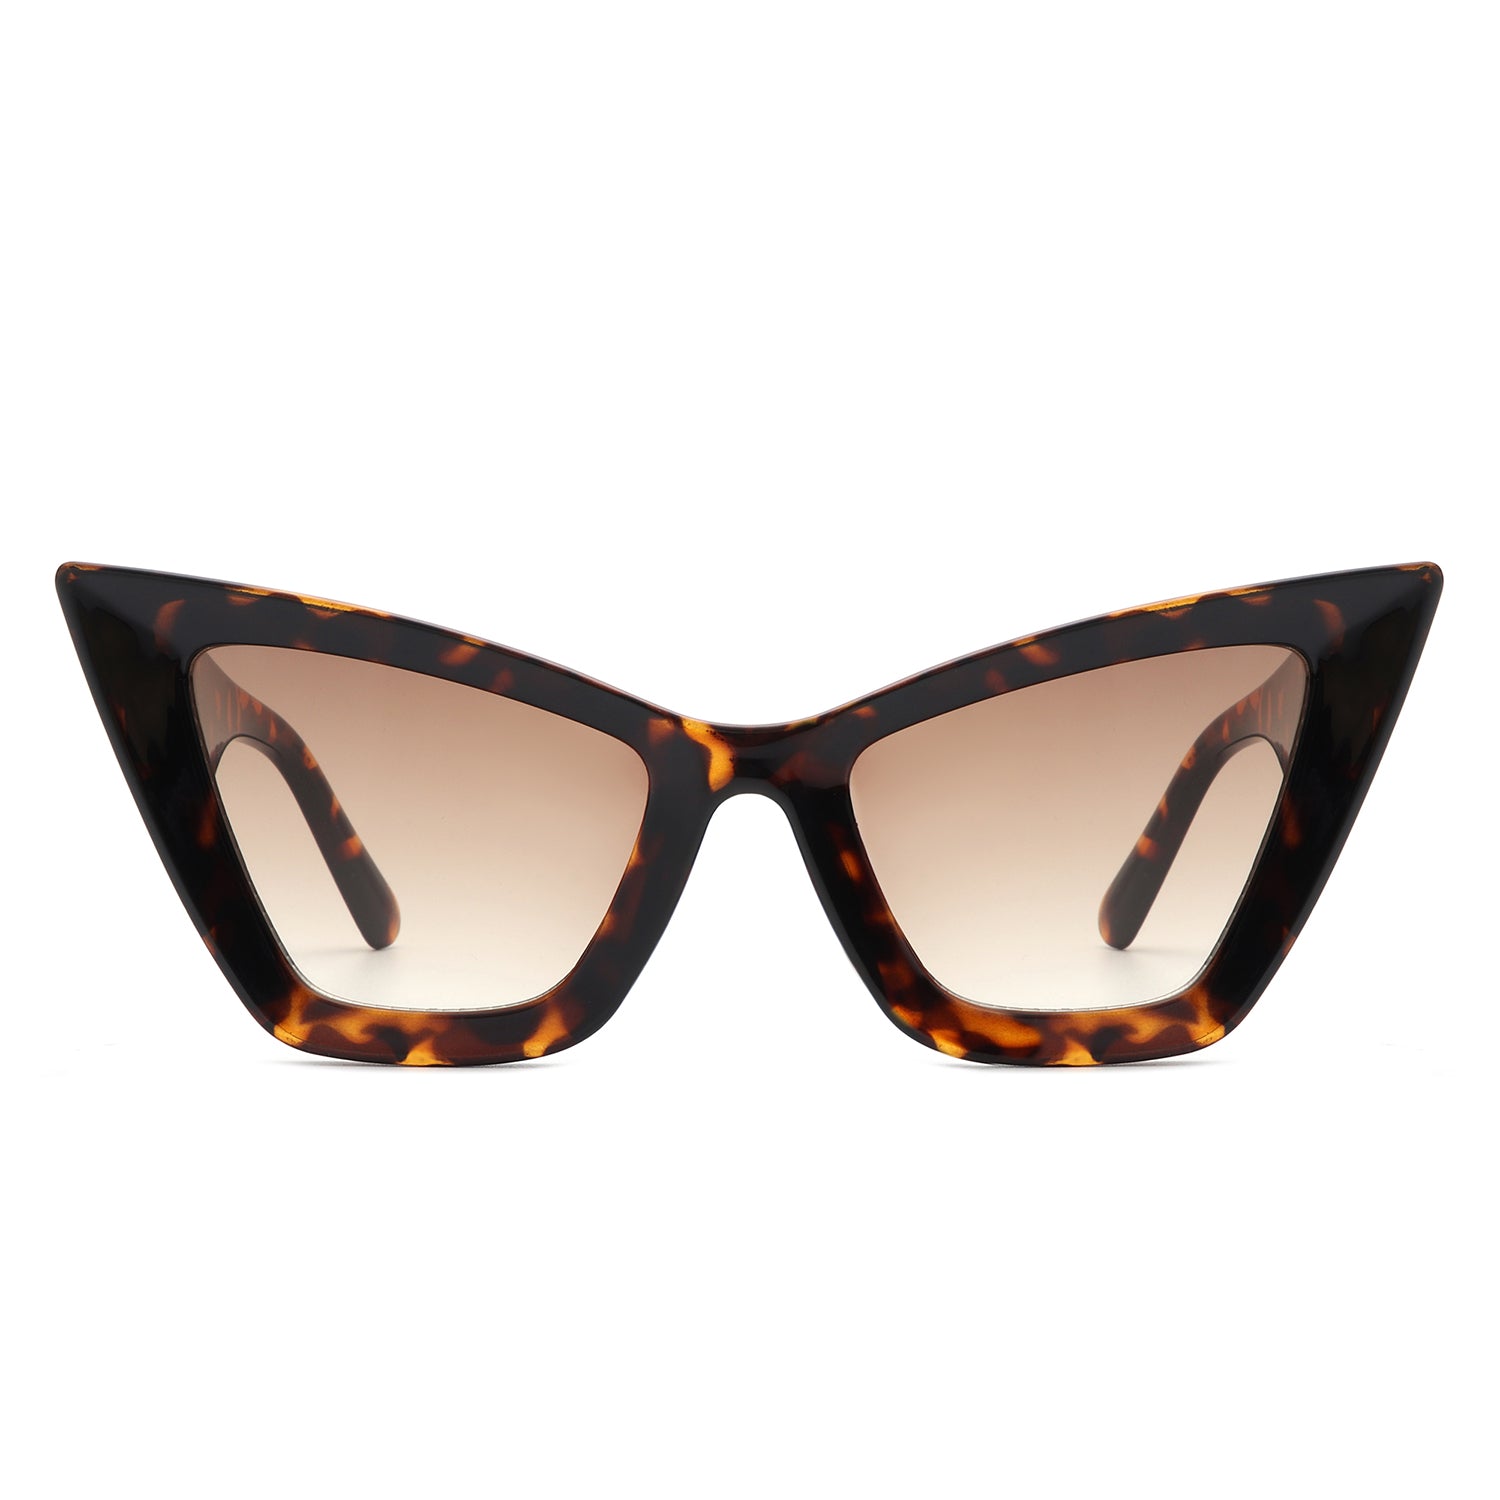 HS1206-1 - Square Retro Fashion High Pointed Cat Eye Wholesale Sunglasses